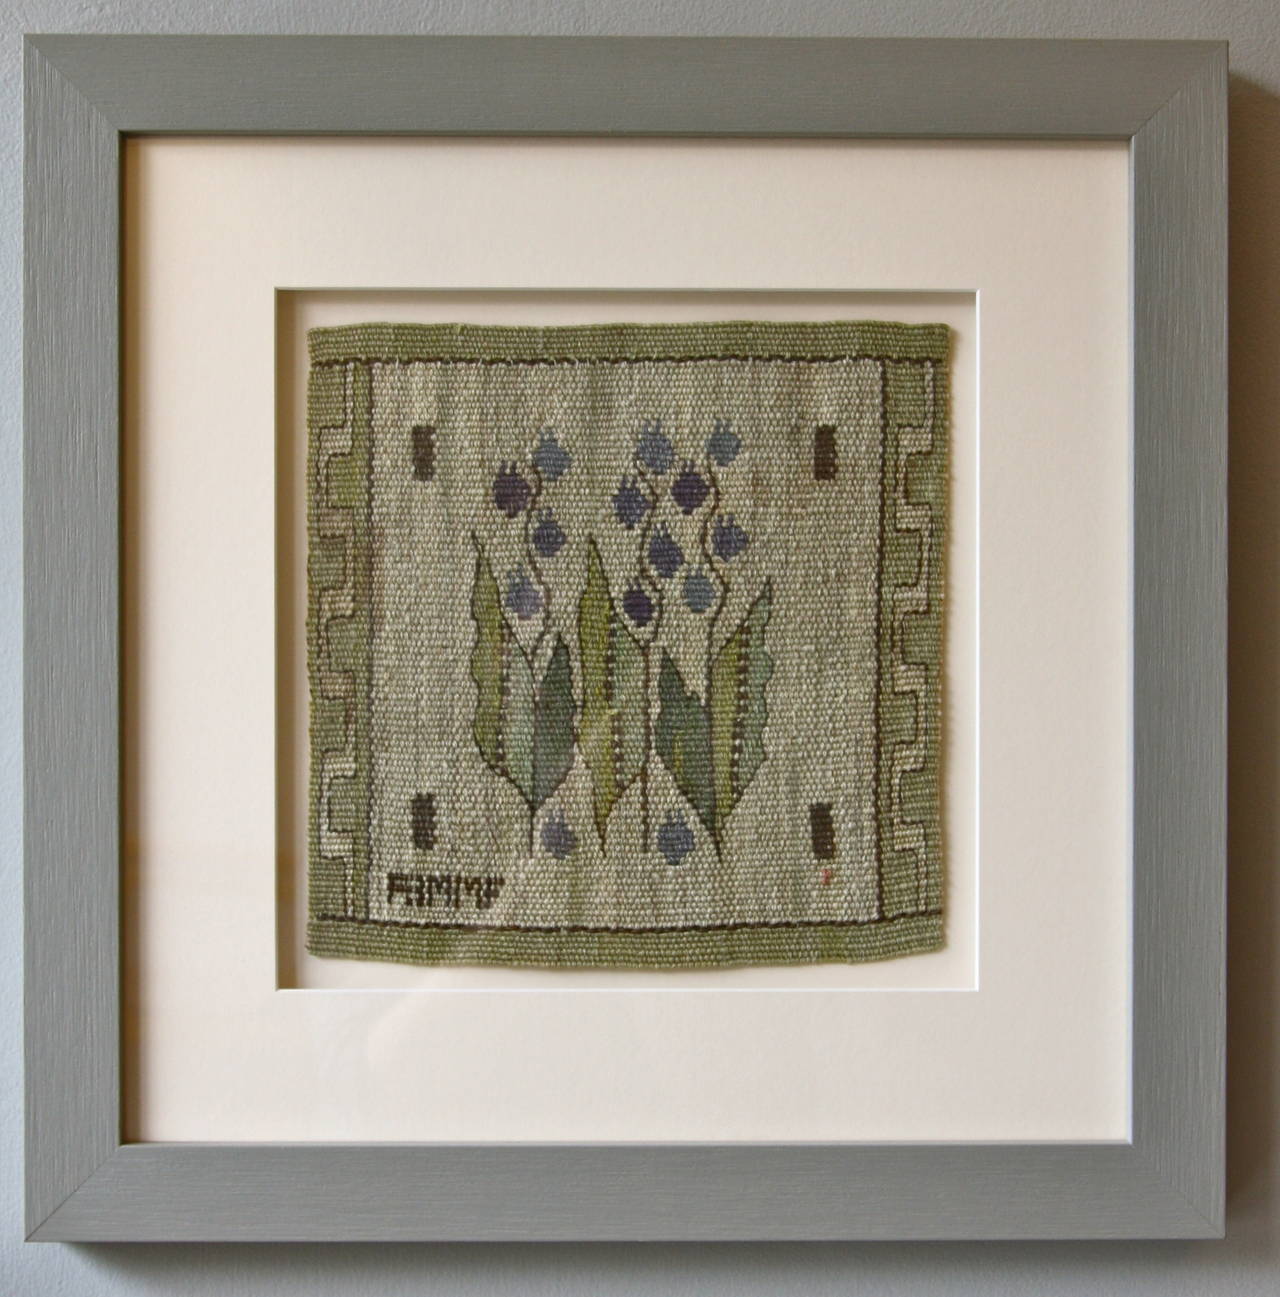 Wonderful bluebells woven by MMF , original slightly faded colours.